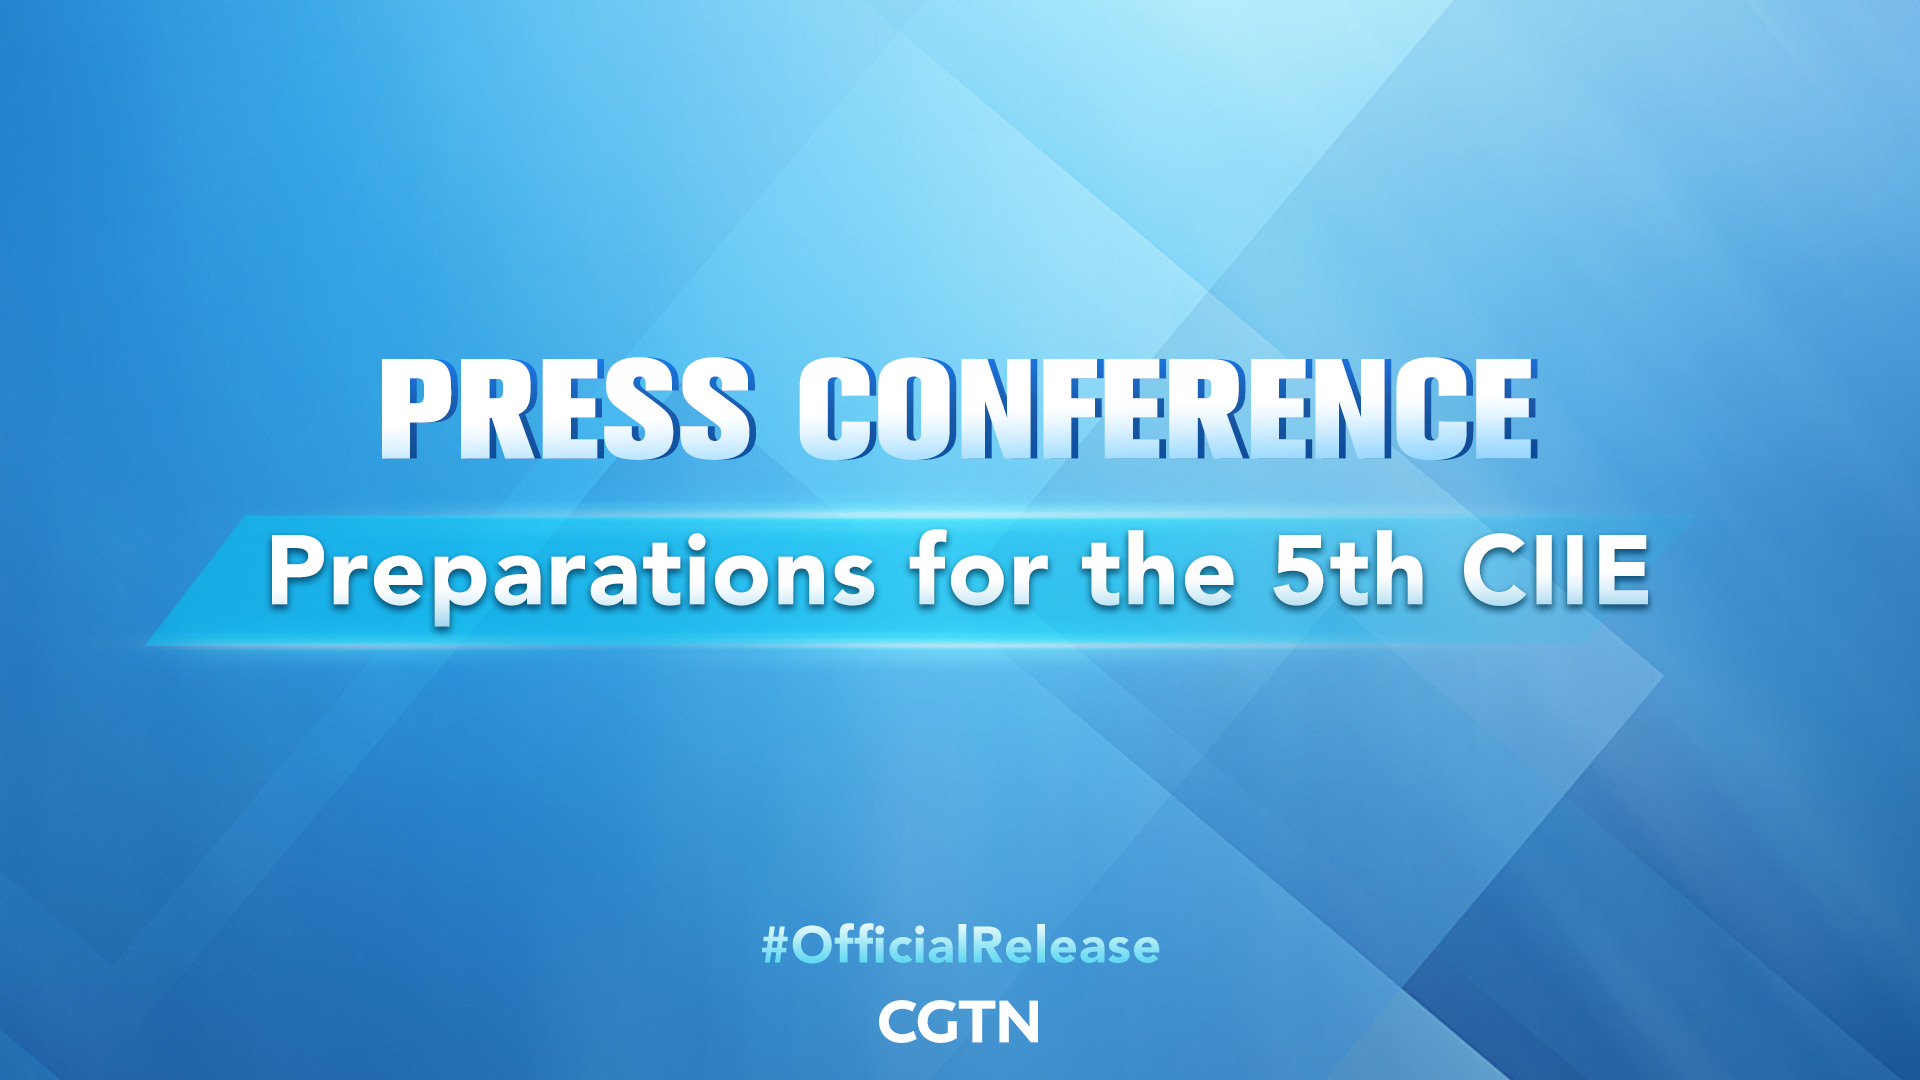 Live: Press conference on preparations for the 5th CIIE